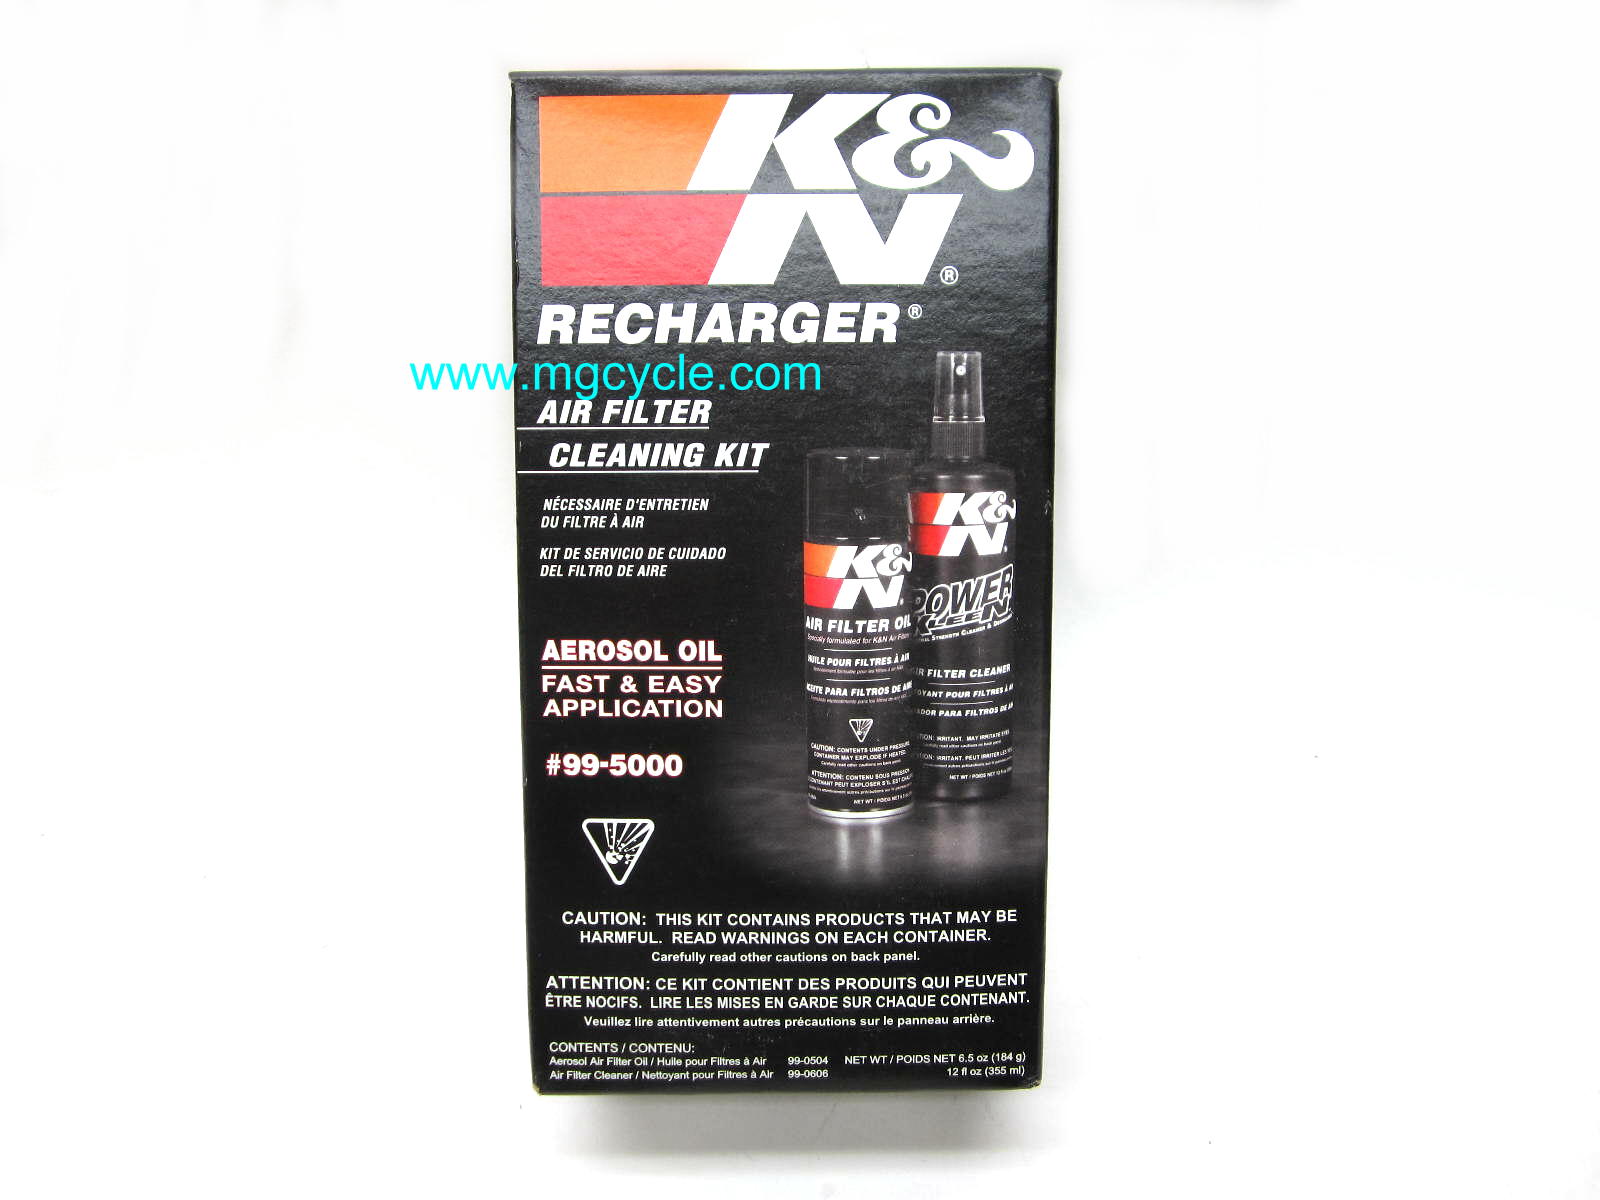 K&N Filter Care Kit, air filter cleaning and oiling solutions